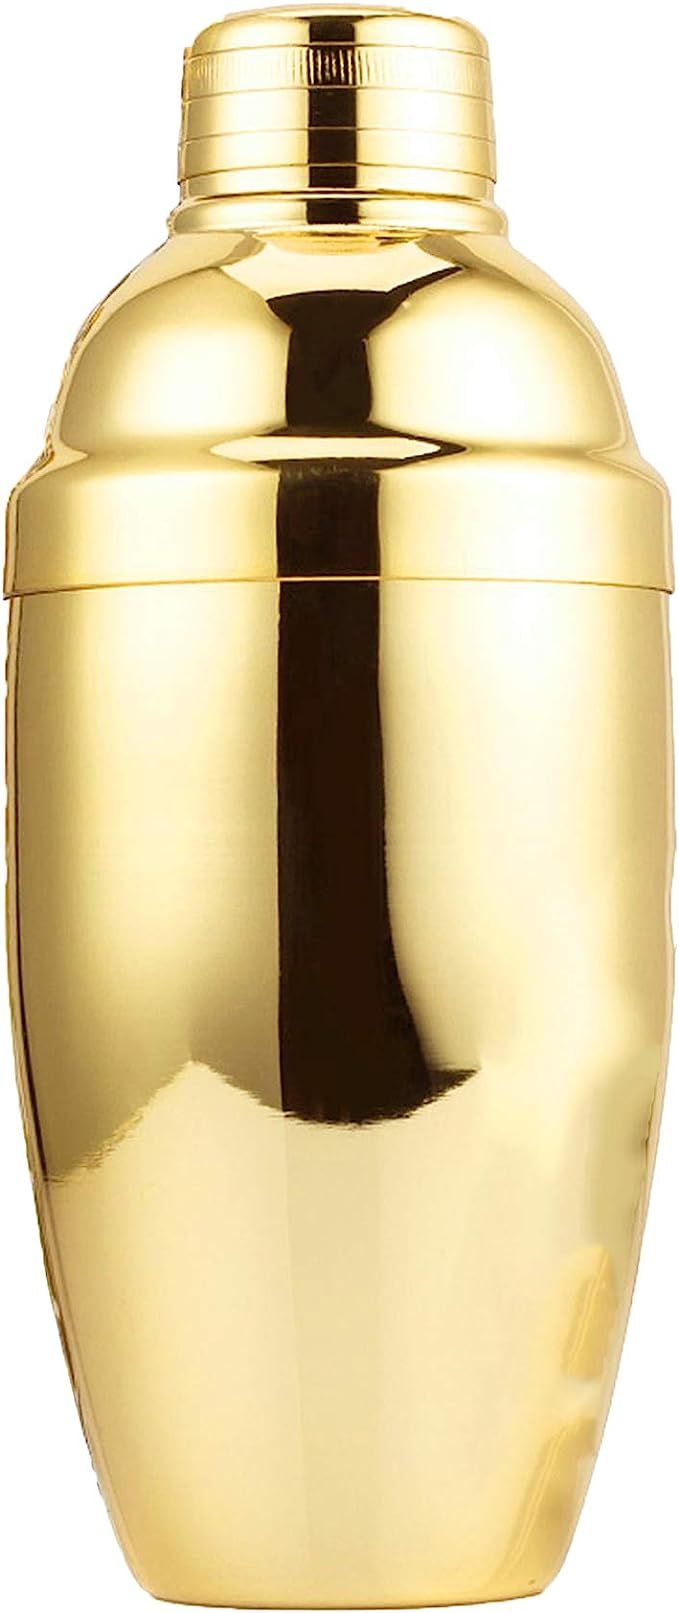 Homestia Gold Cocktail Shaker Martini Mixer Stainless Steel 20oz Drink Shaker with Built-in Strai... | Amazon (US)